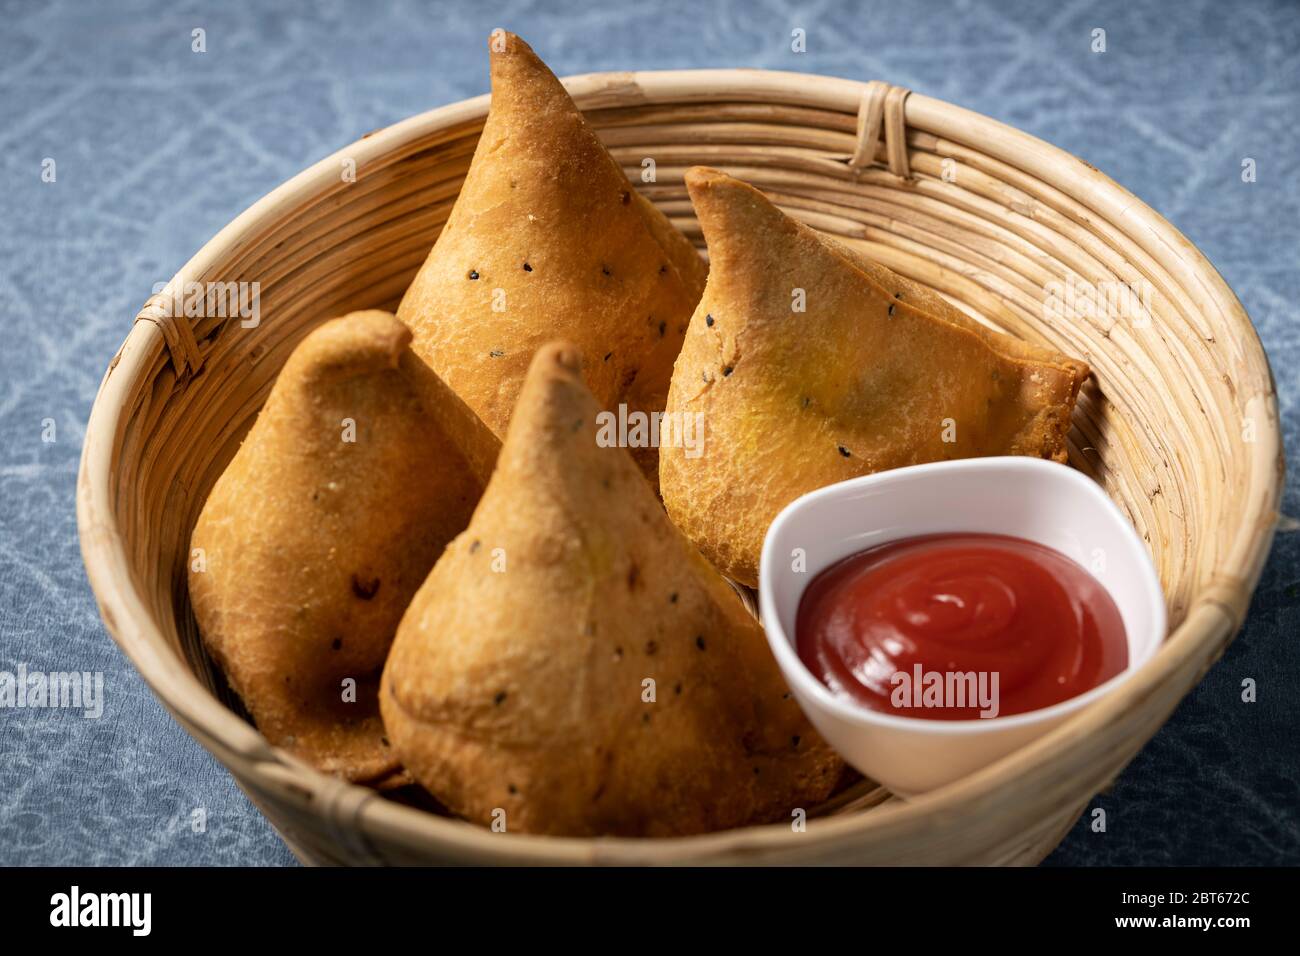 Punjabi Samosa, a snack filled with mashed potato deep fried a tasty snack preferred by most indians Stock Photo